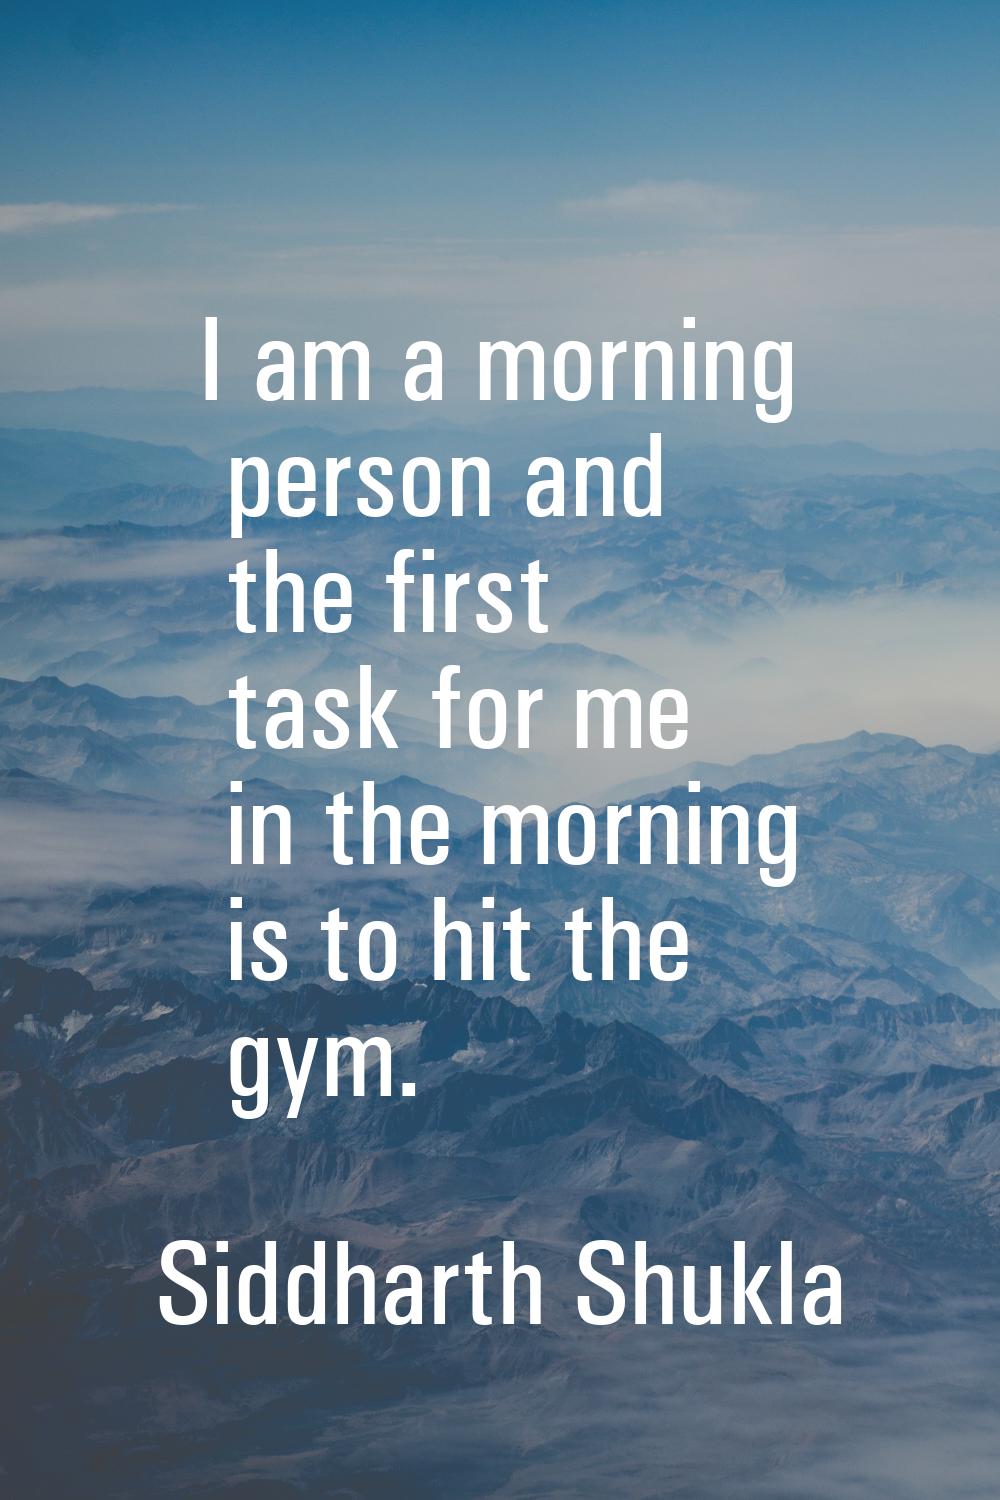 I am a morning person and the first task for me in the morning is to hit the gym.